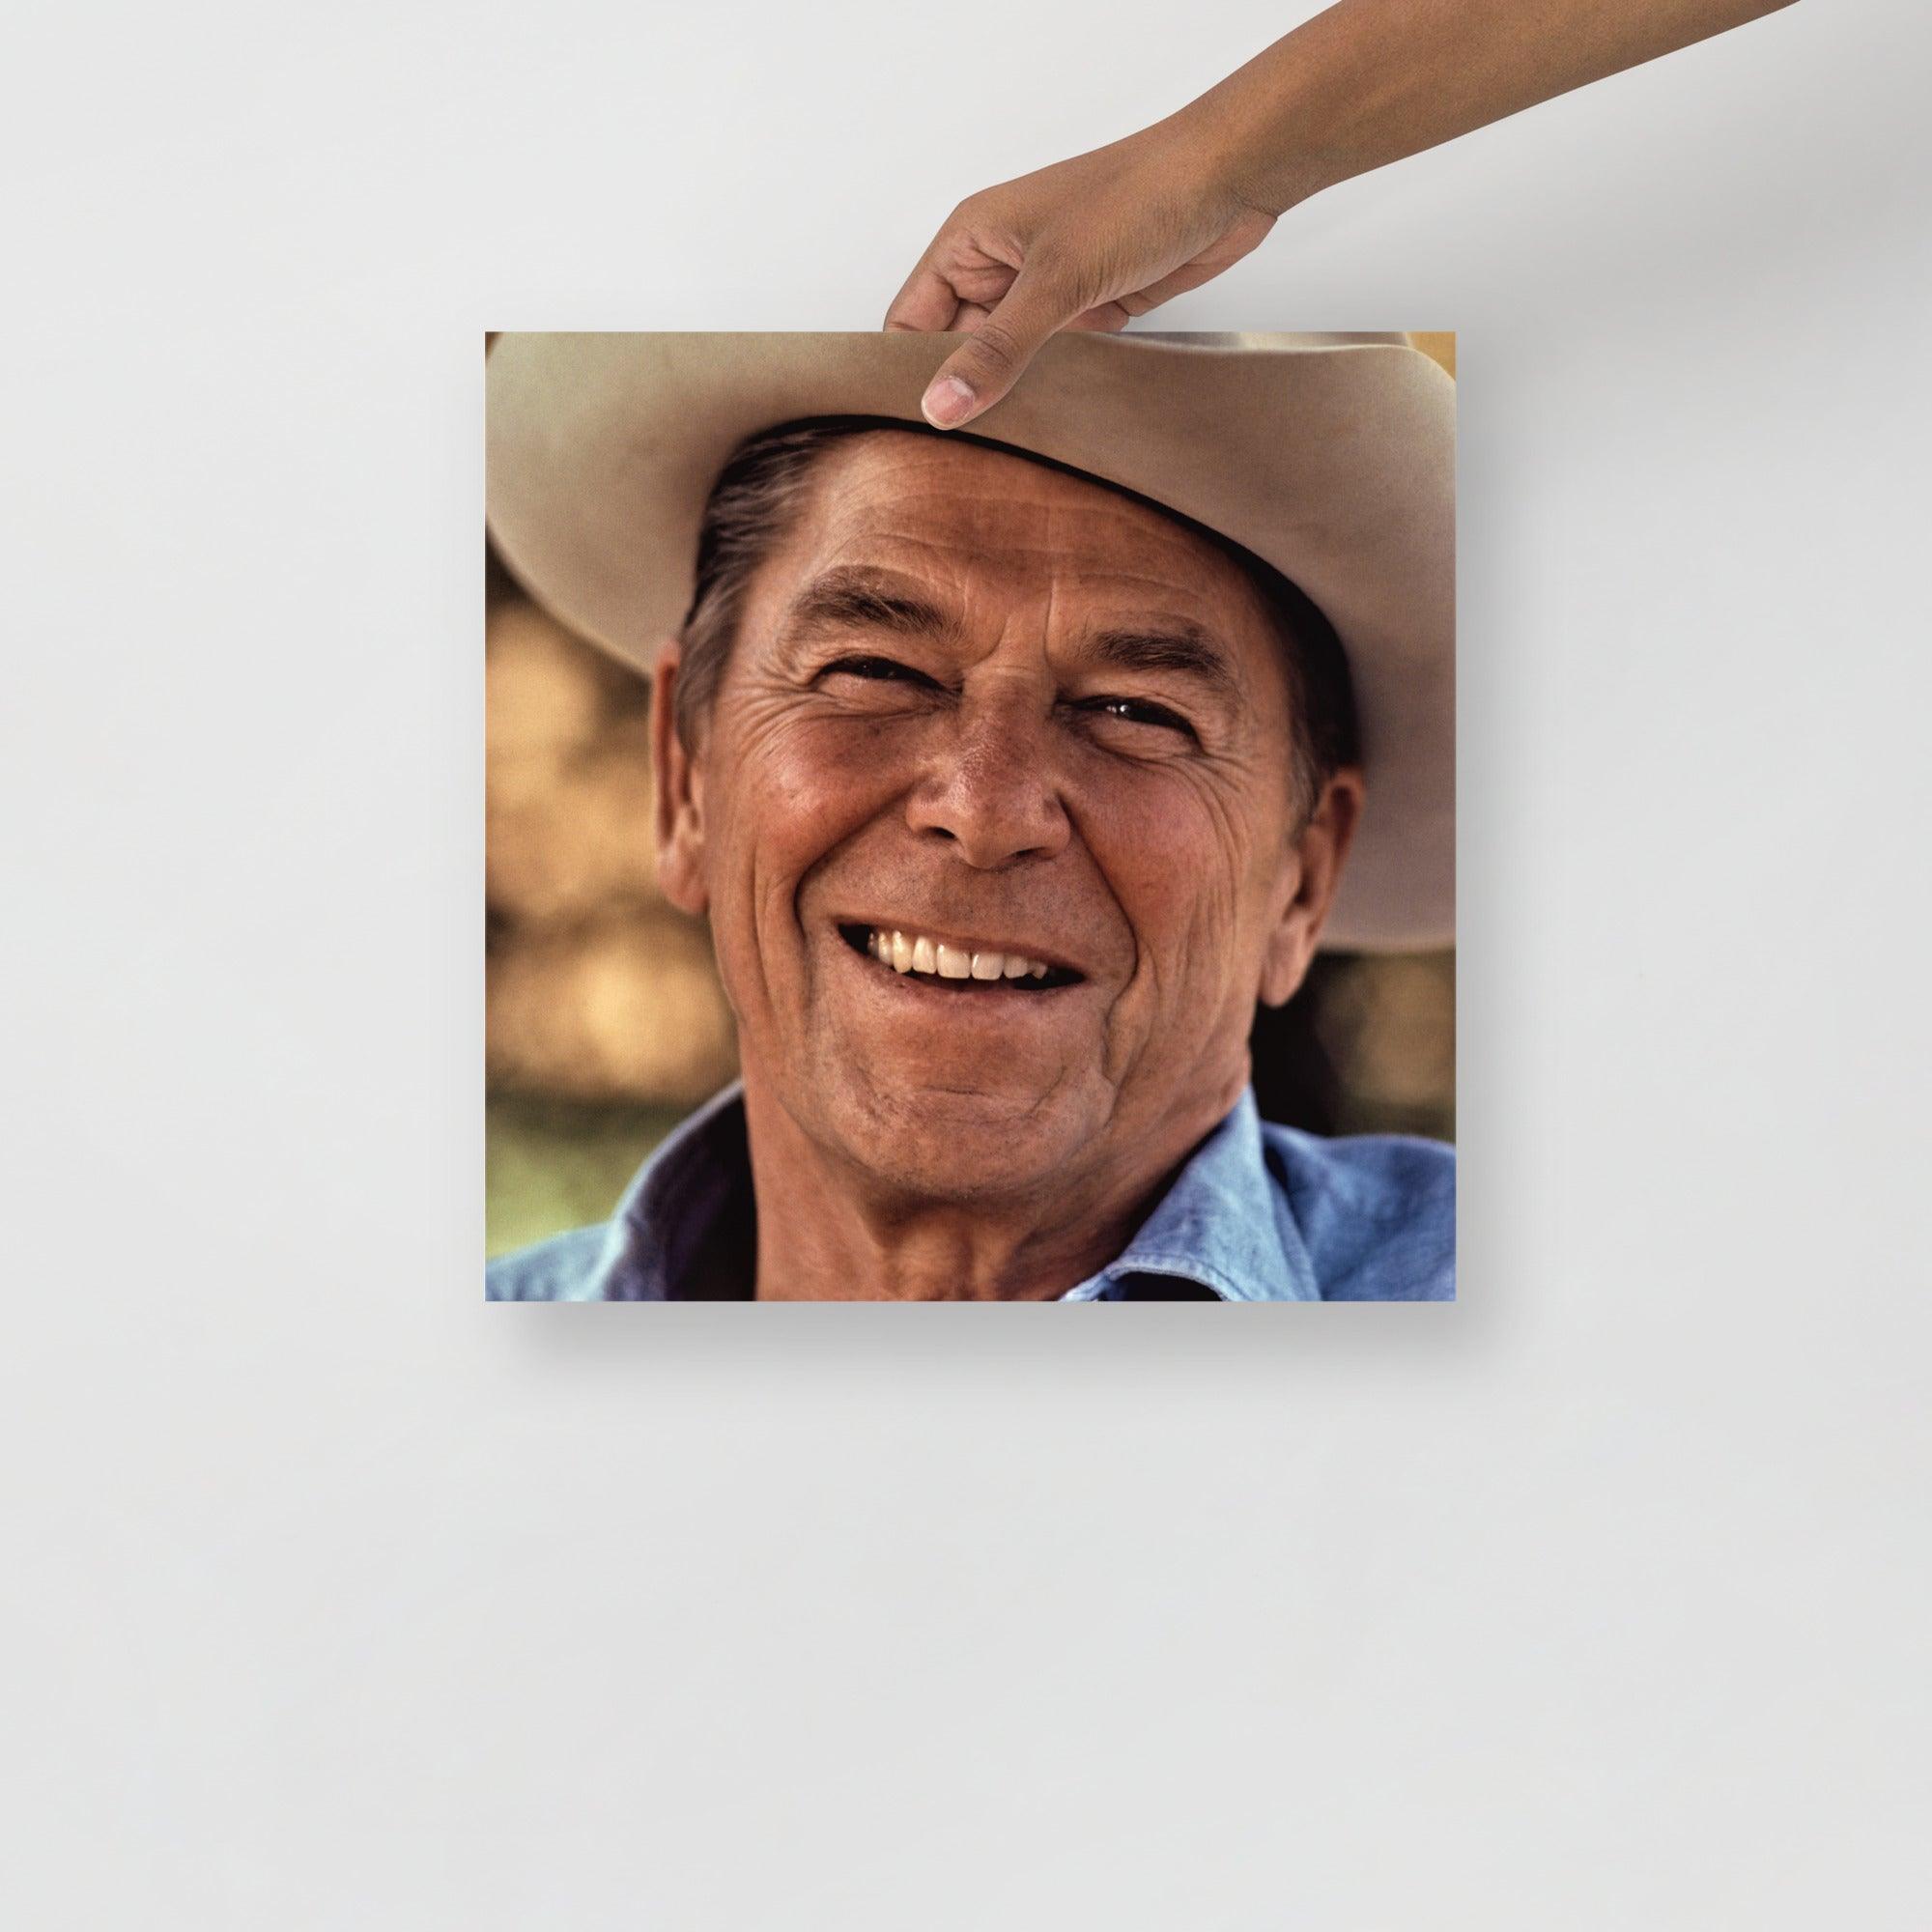 A Ronald Reagan Cowboy Hat poster on a plain backdrop in size 14x14”.